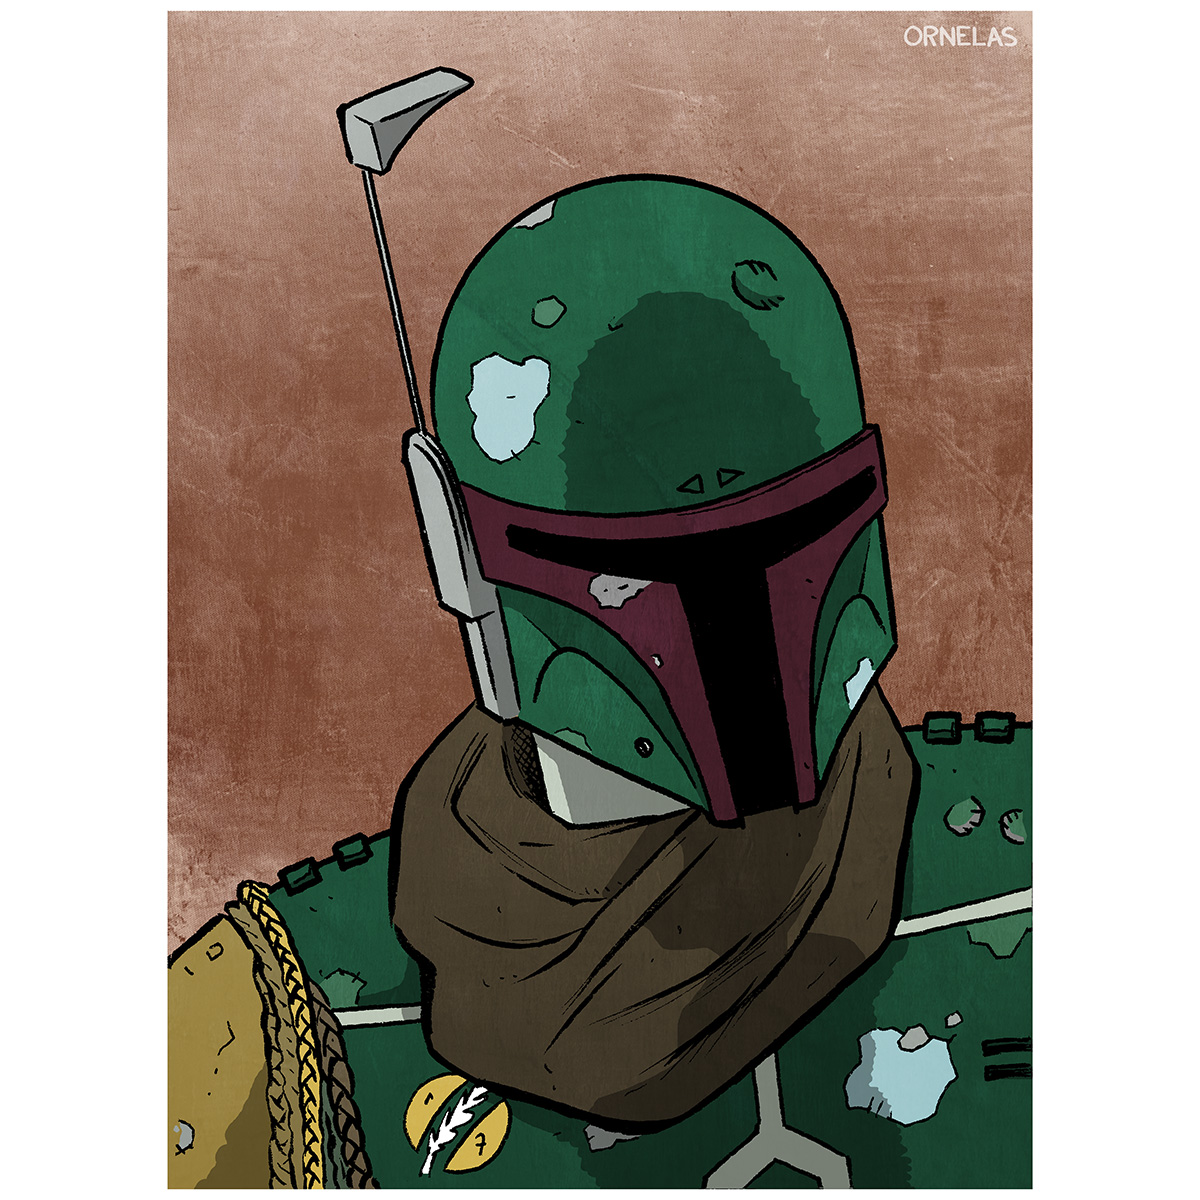 May The Sixth Be With You #BuyOrnelasArt #commissionsopen #comicbooks #comix #supportlocalartists #shopsmall #supportindieartists #starwarsart #maythe4thbewithyou #maythefourth #bobafett #starwarsbountyhunter